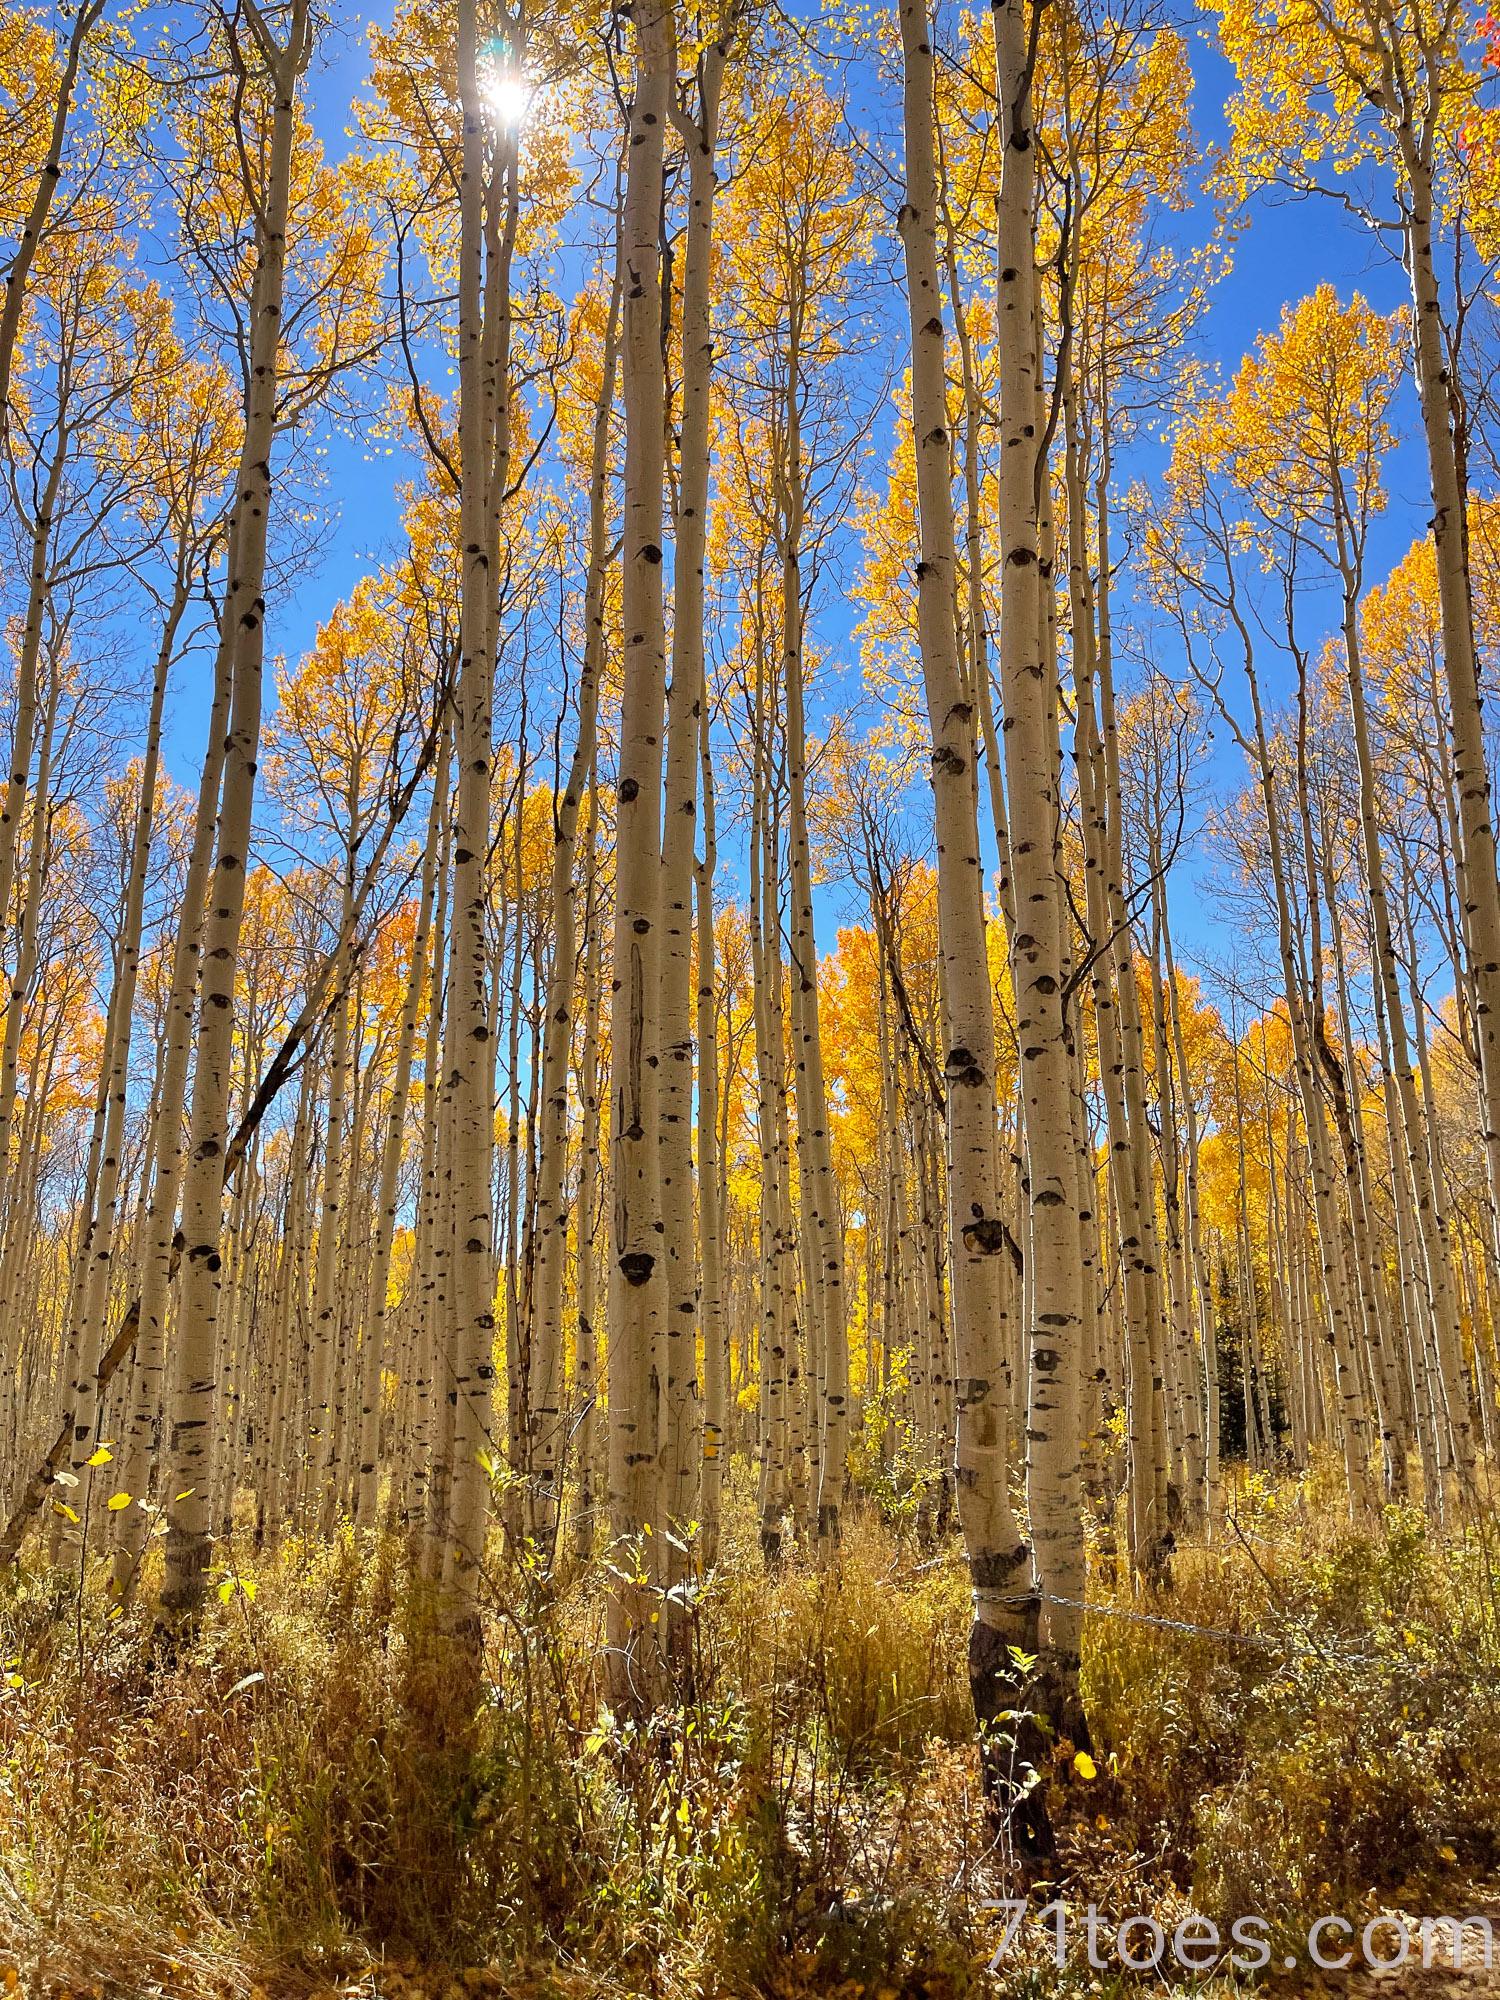 where to see the best fall leaves in Utah